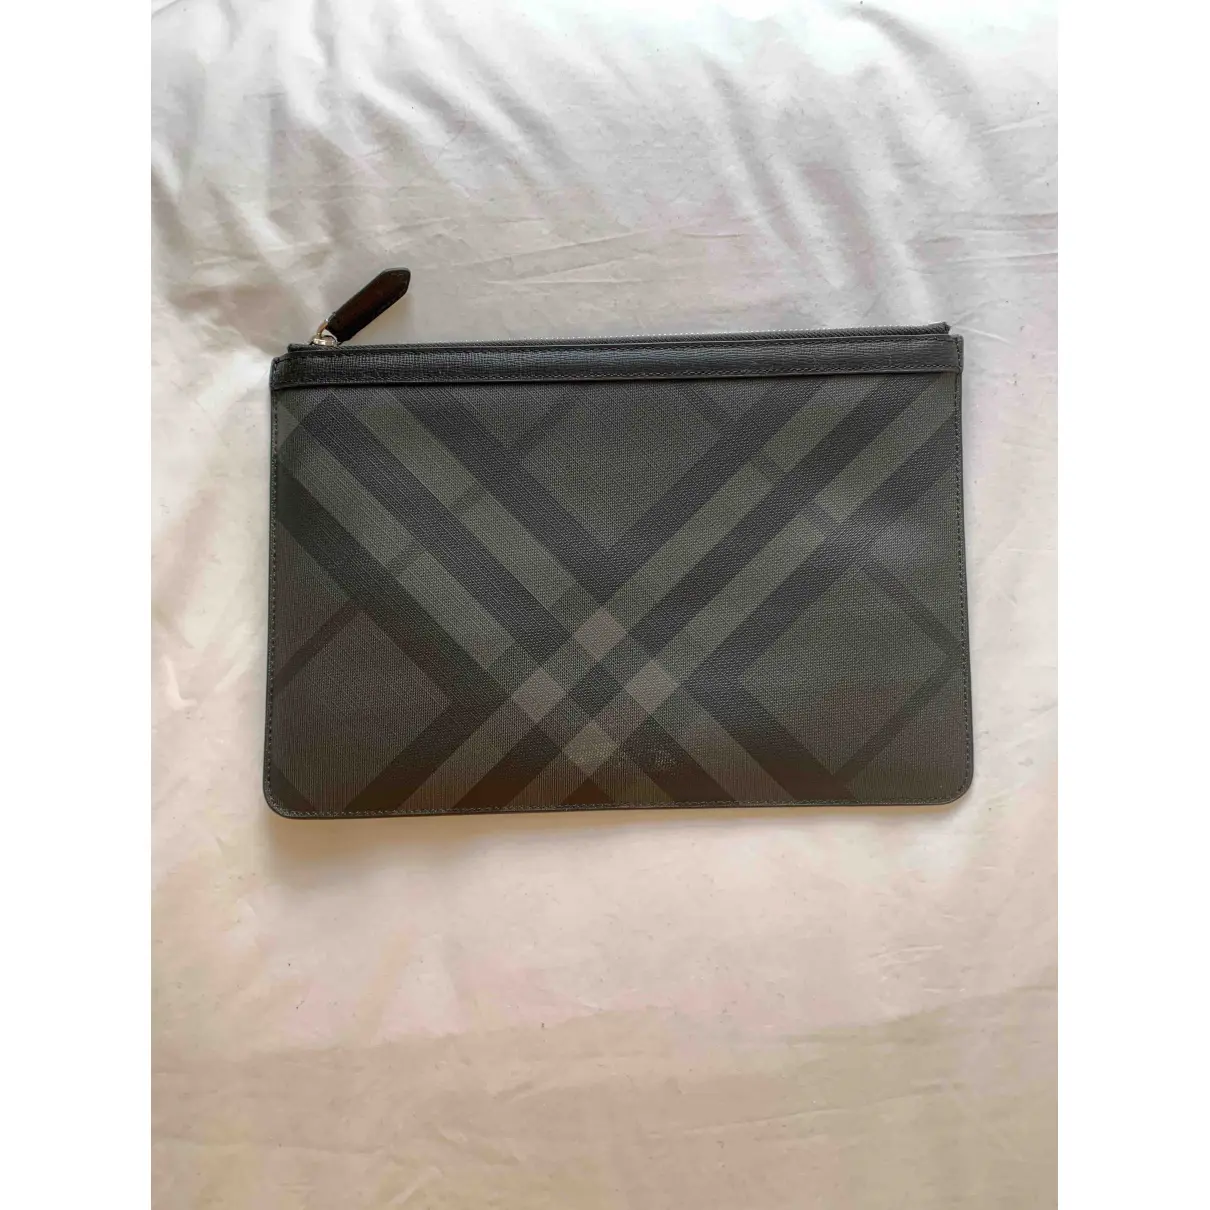 Buy Burberry Cloth small bag online